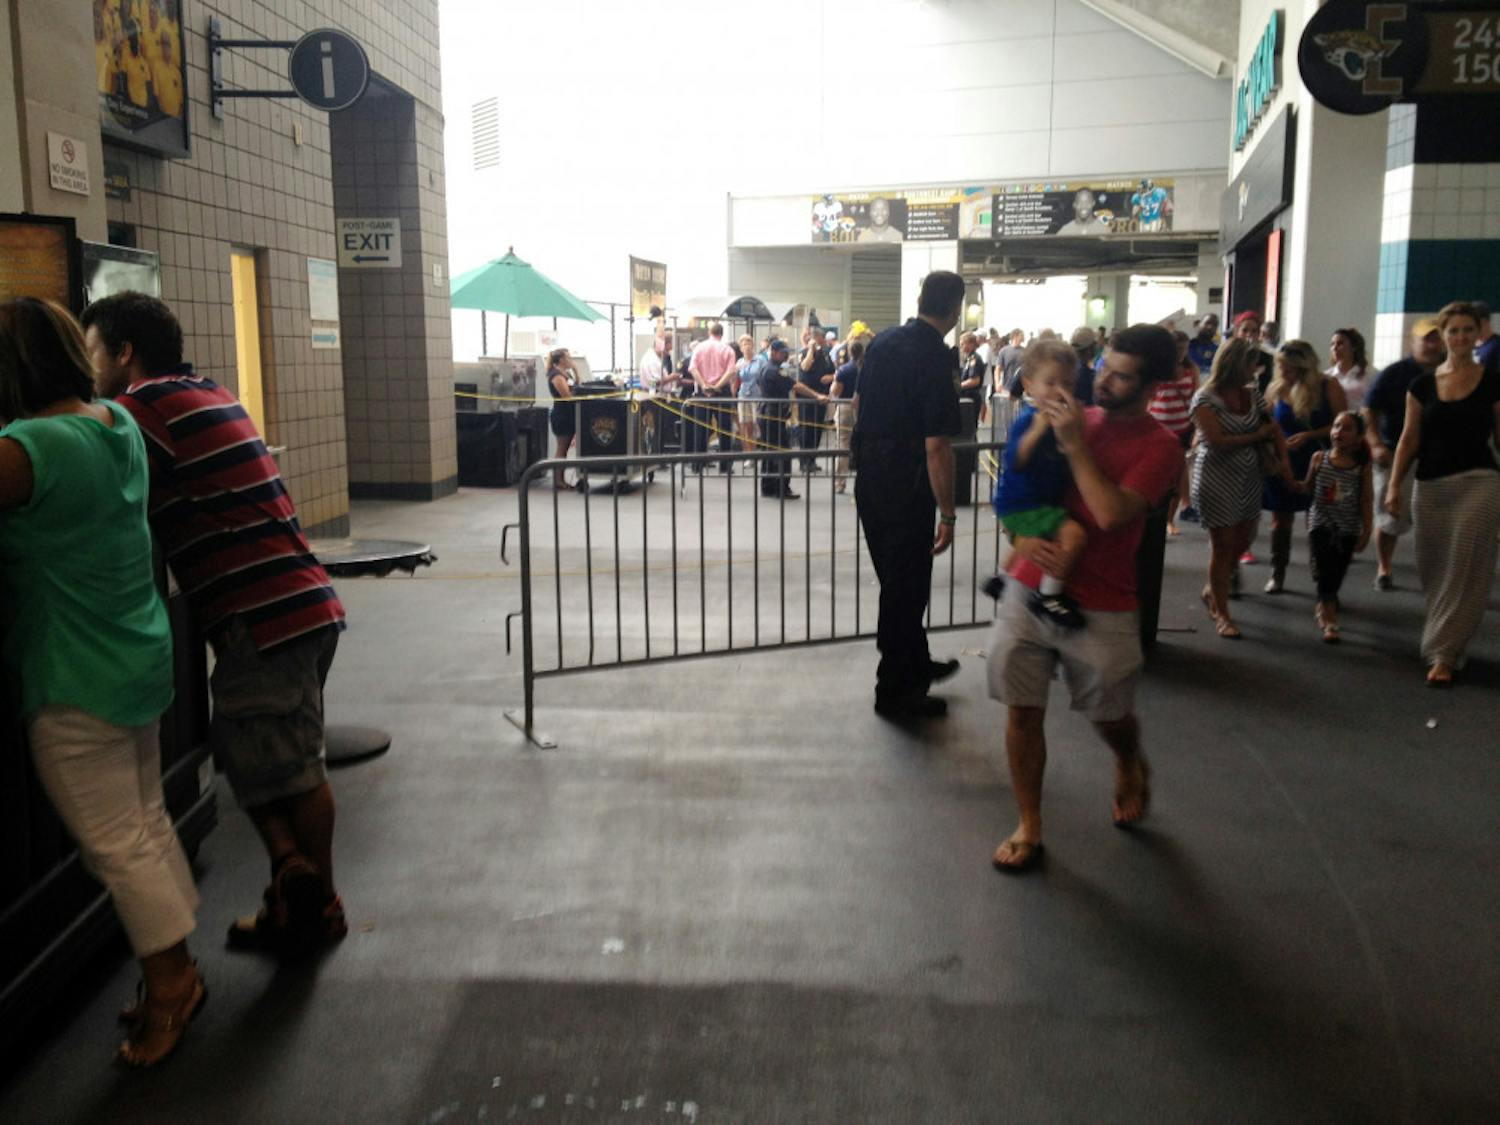 Spectators walk past a barricaded area where a fan fell on Saturday during the United States' 2-1 win against Nigeria at EverBank Field